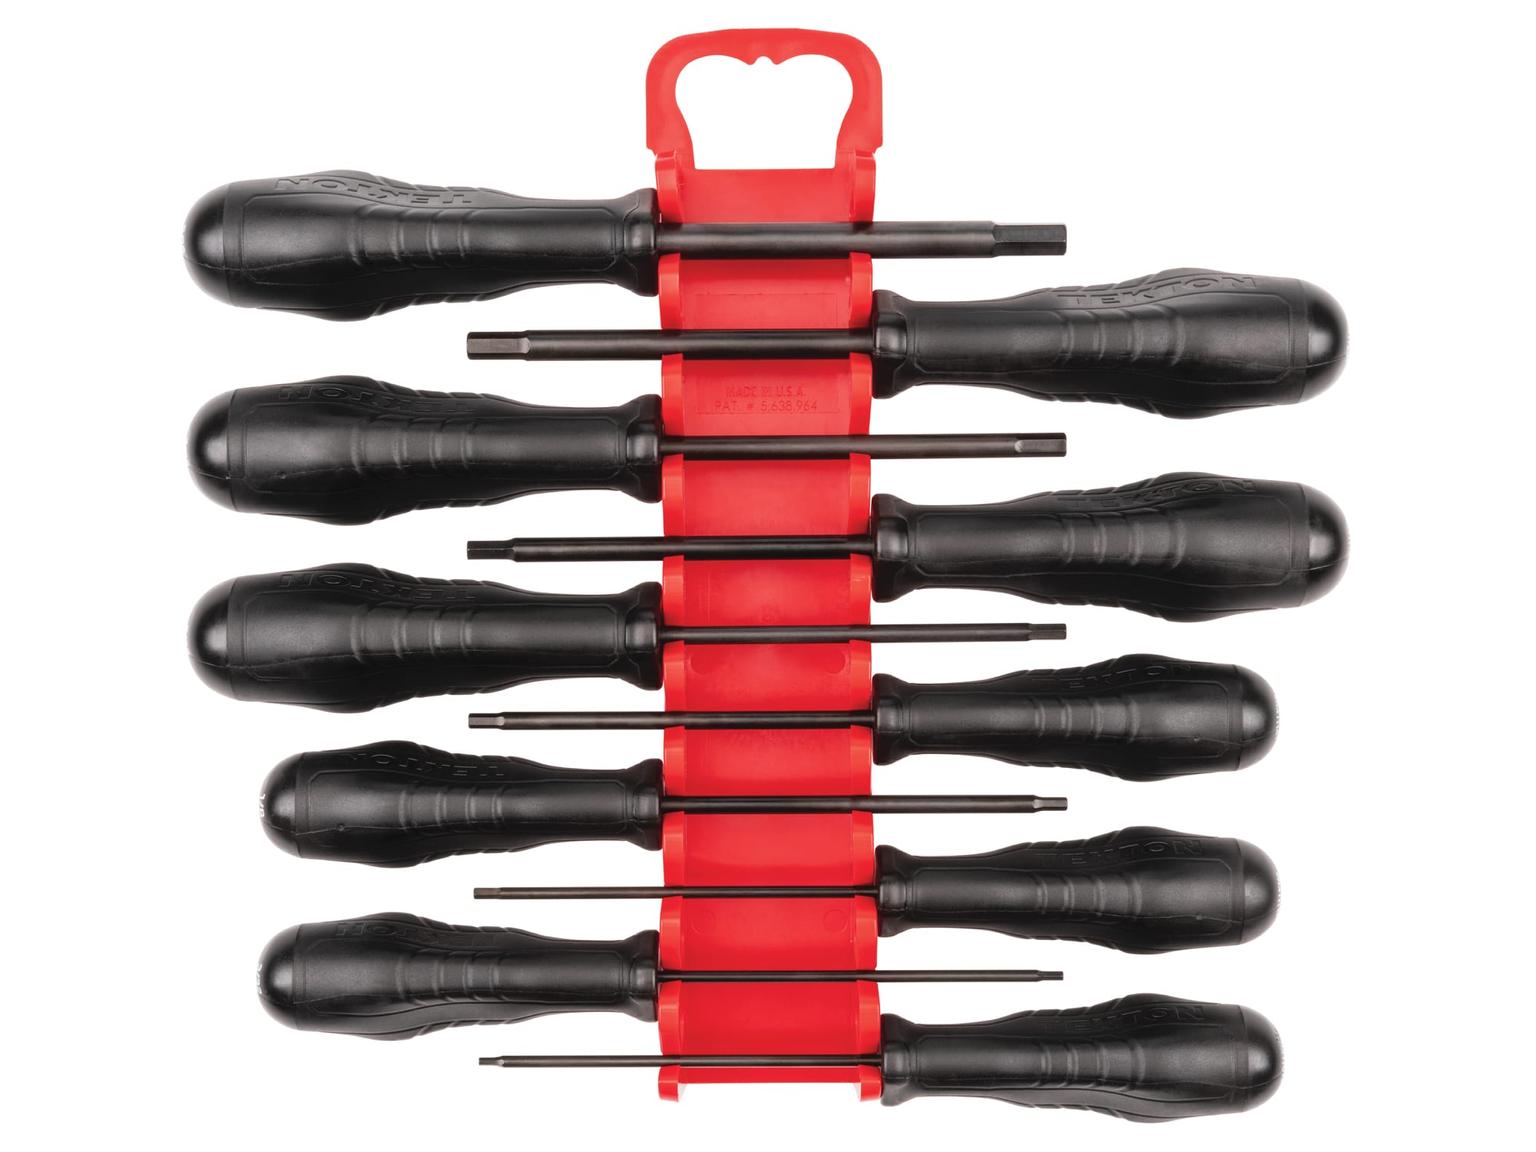 TEKTON DHX92101-T Hex High-Torque Black Oxide Blade Screwdriver Set with Holder, 10-Piece (5/64-5/16 in.)